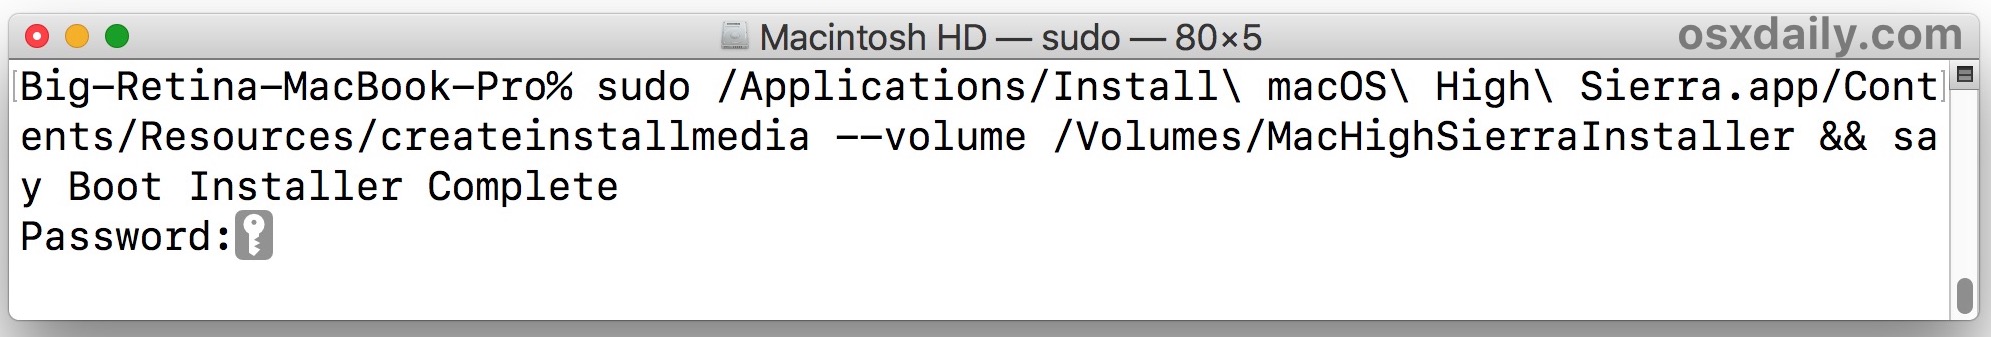 command syntax to create macOS High Sierra boot installer